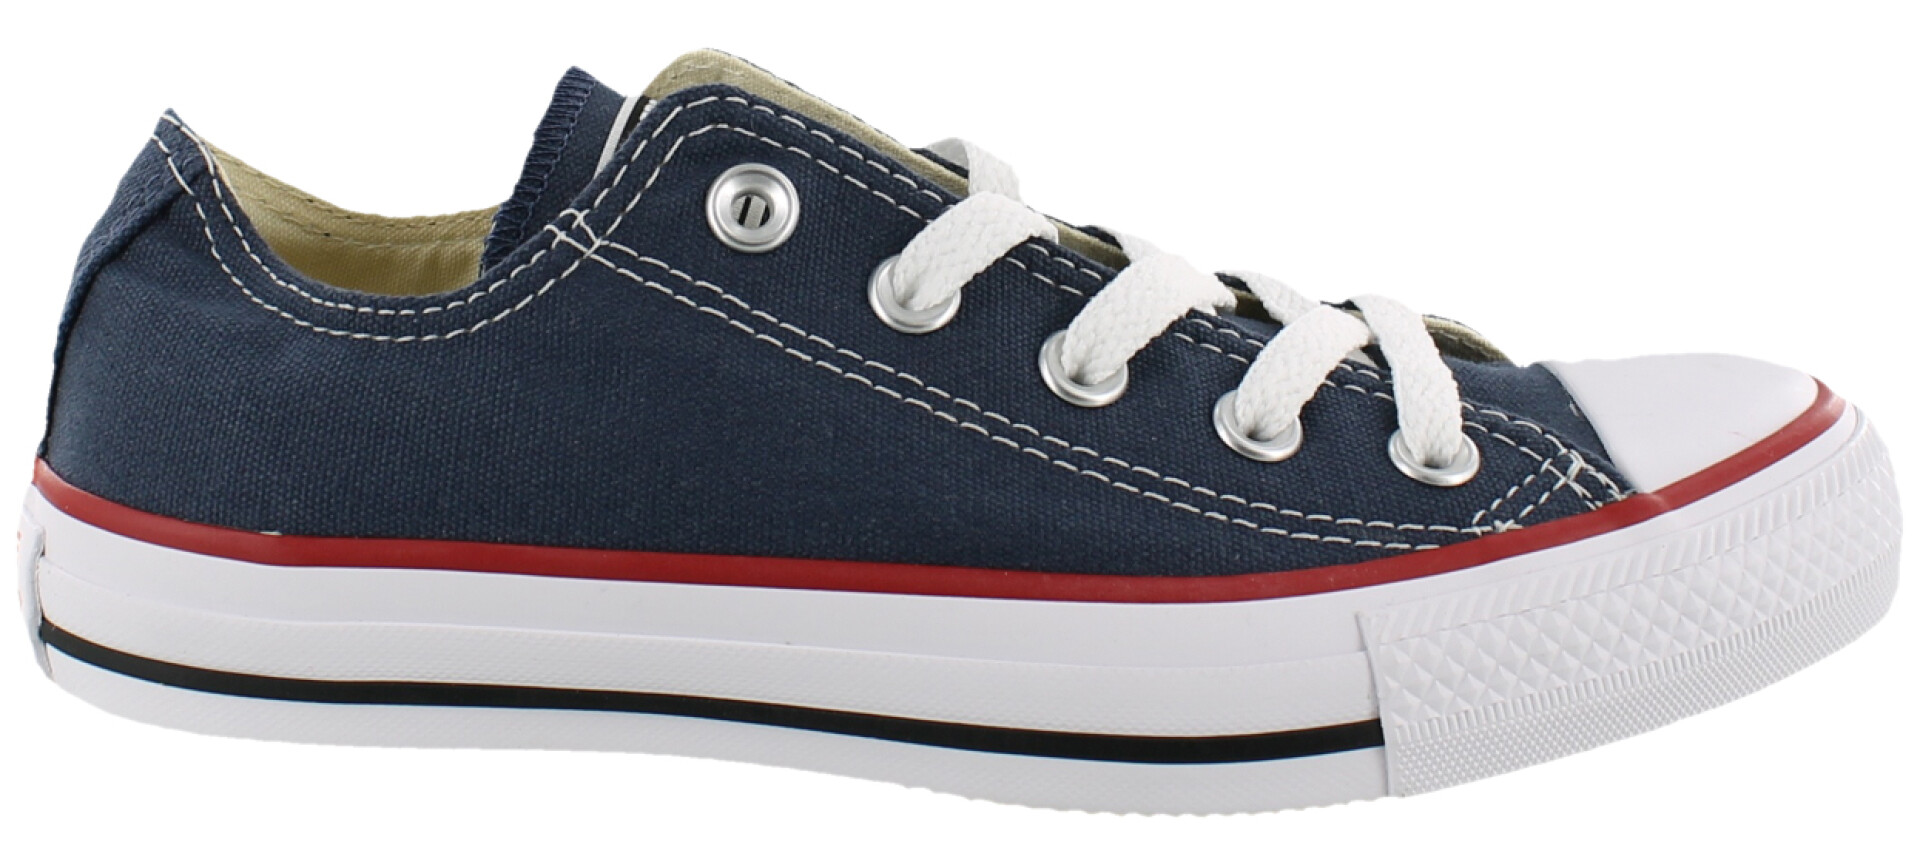 Classic - Basket Low Converse - Navy/Red 